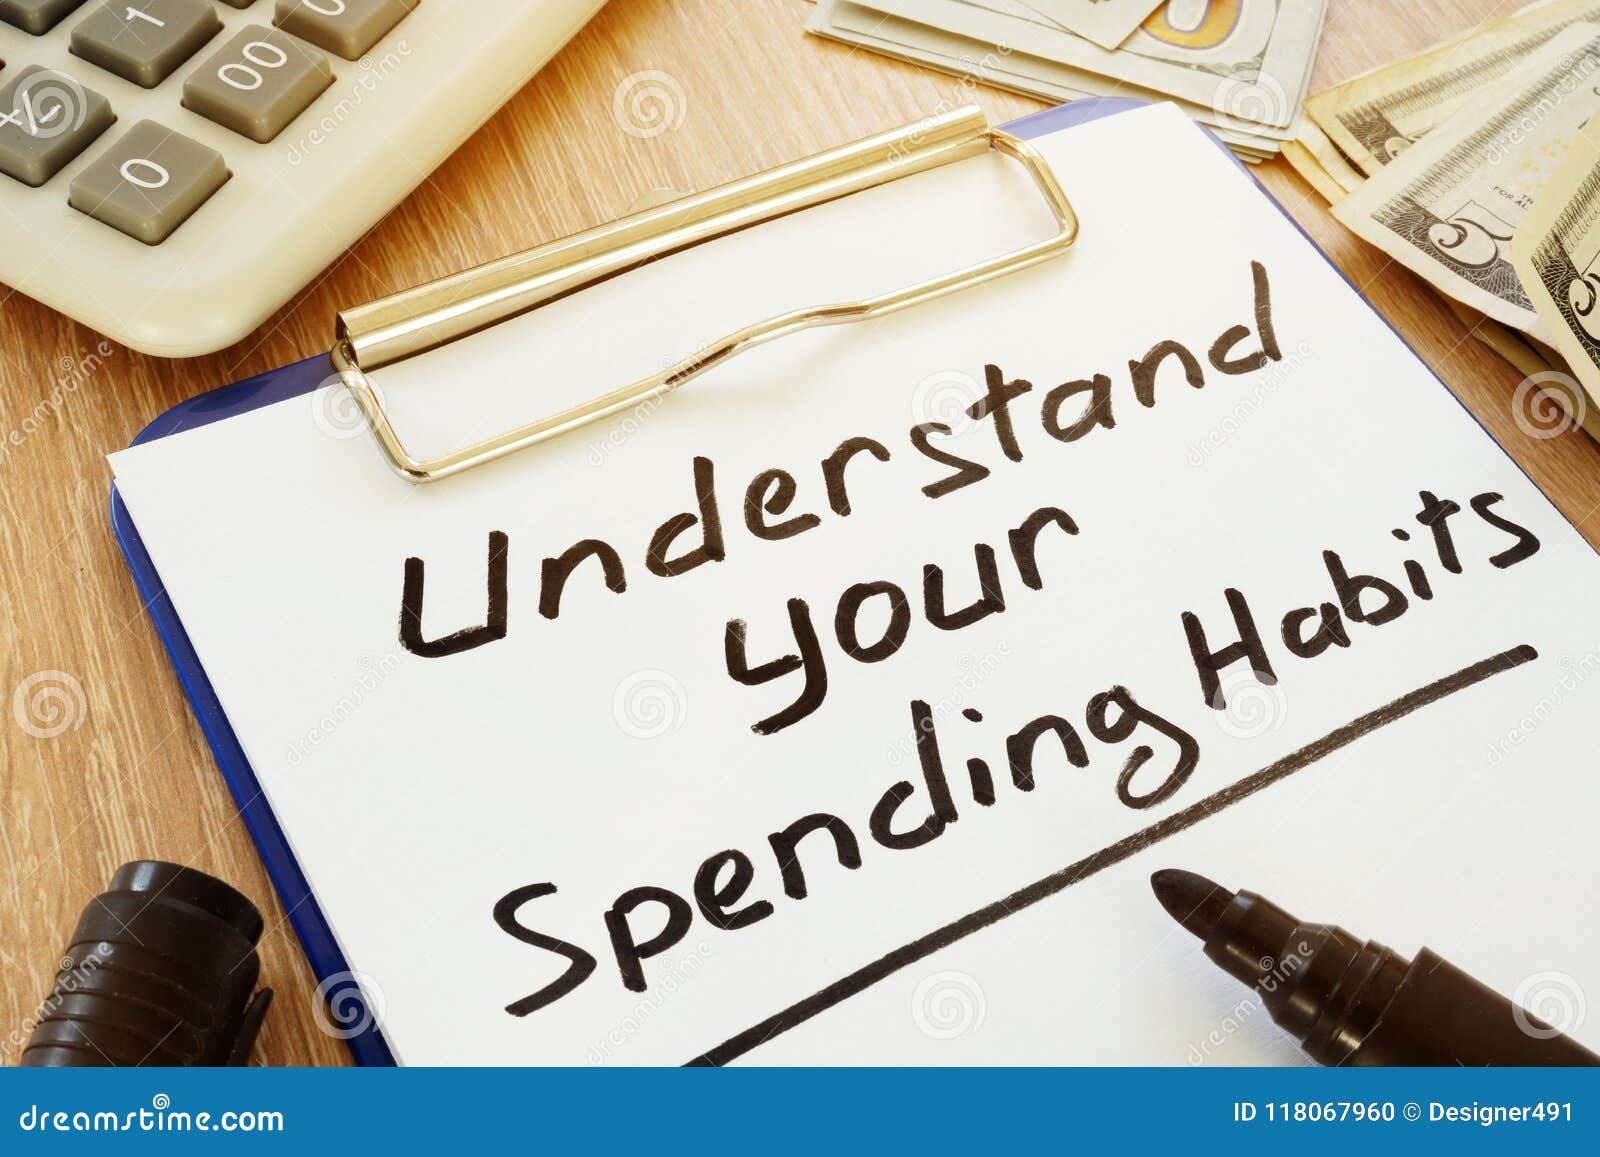 understand your spending habits written on the clipboard.